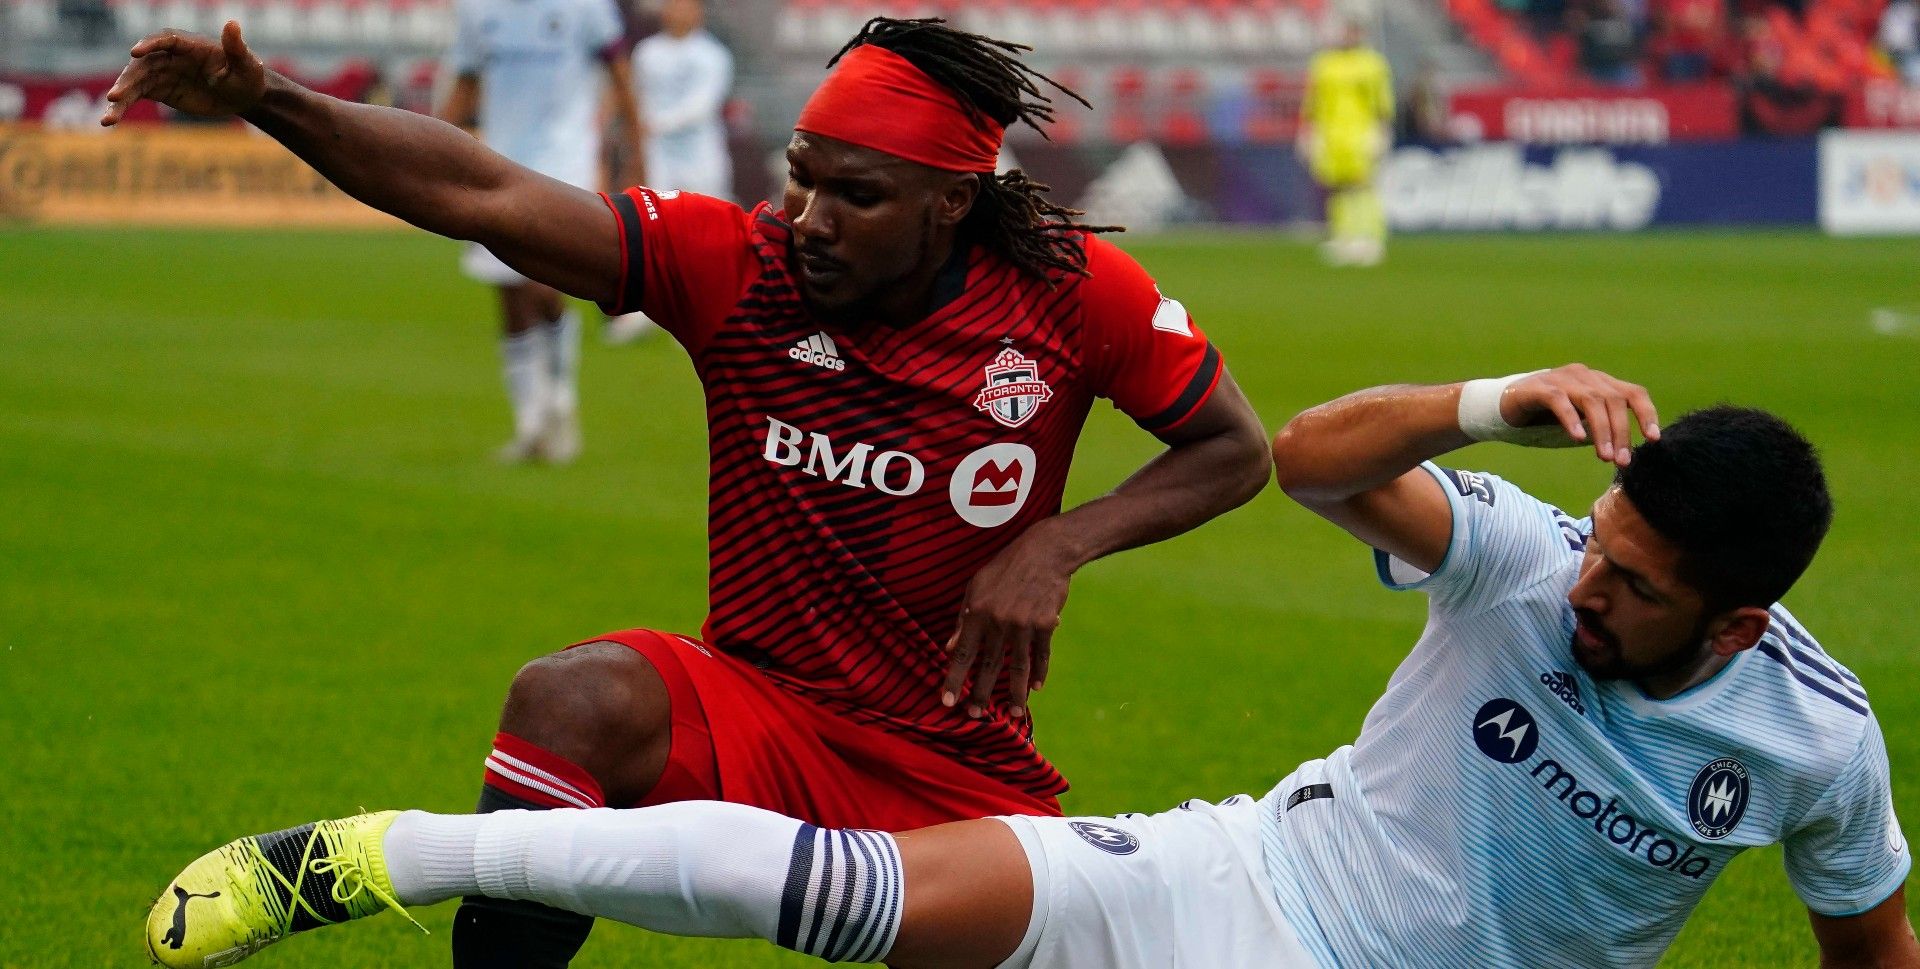 Toronto FC vs. Chicago Fire: What you need to know